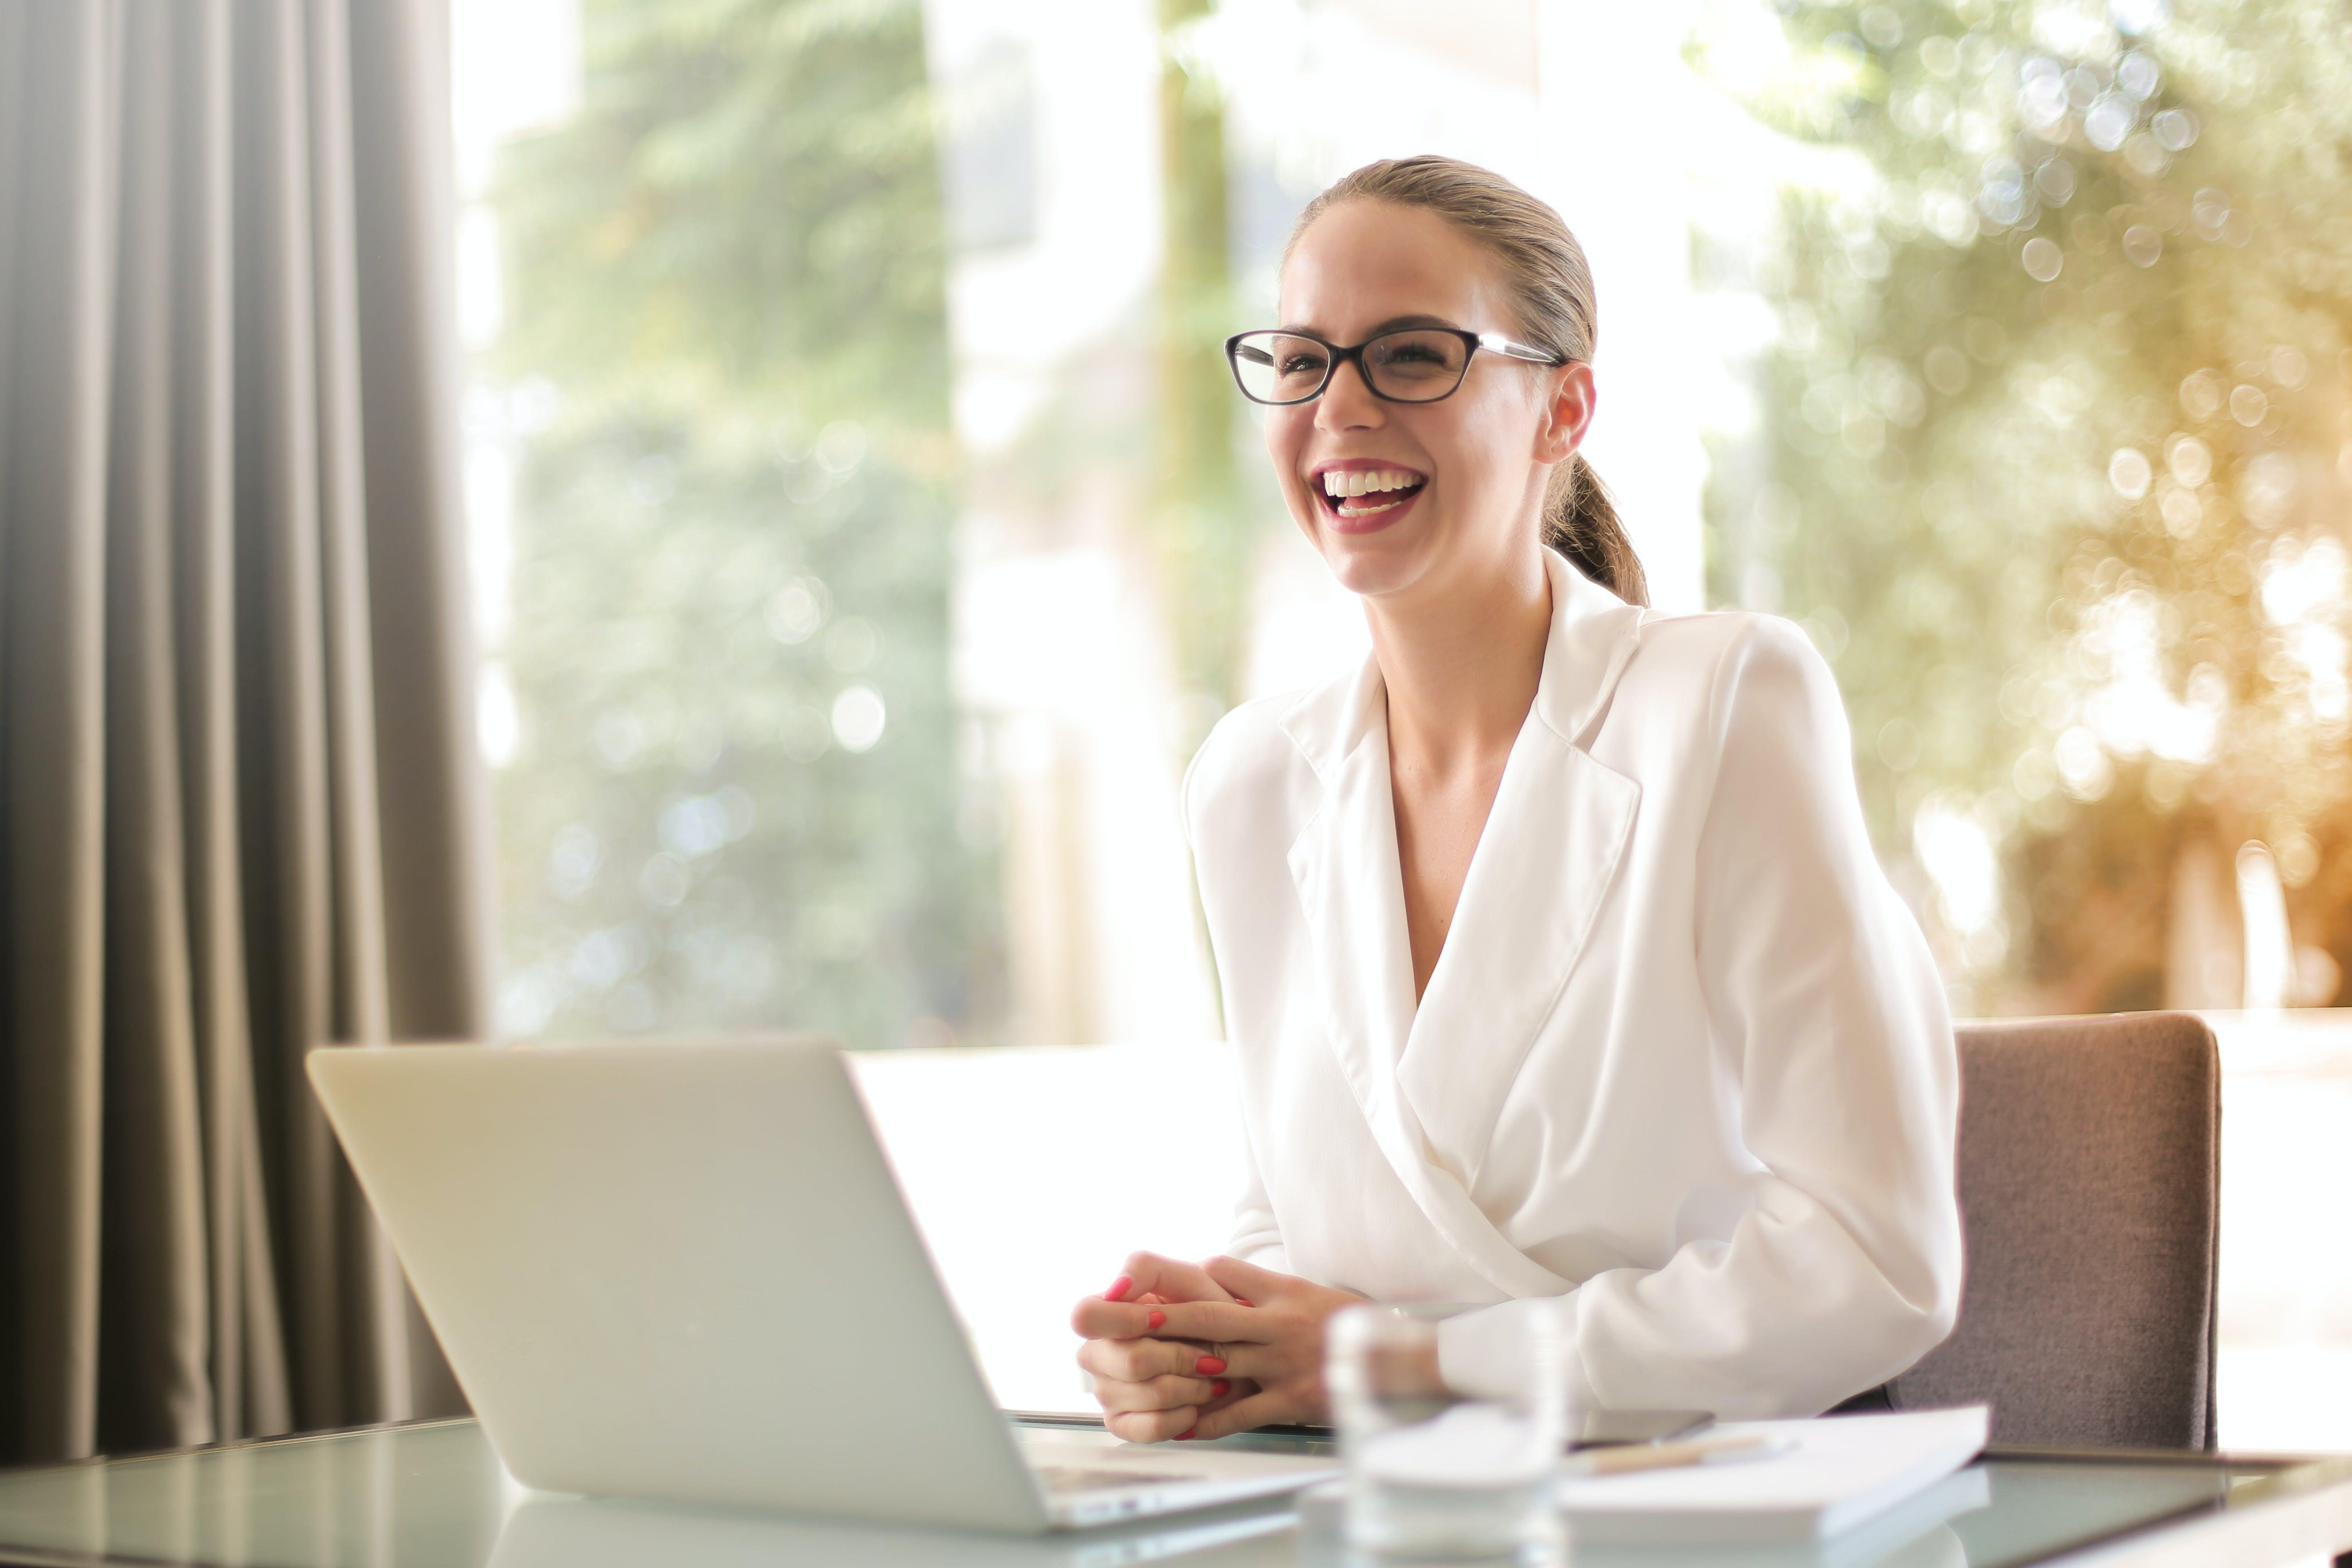 Business woman wearing glasses laughs while sitting at computer